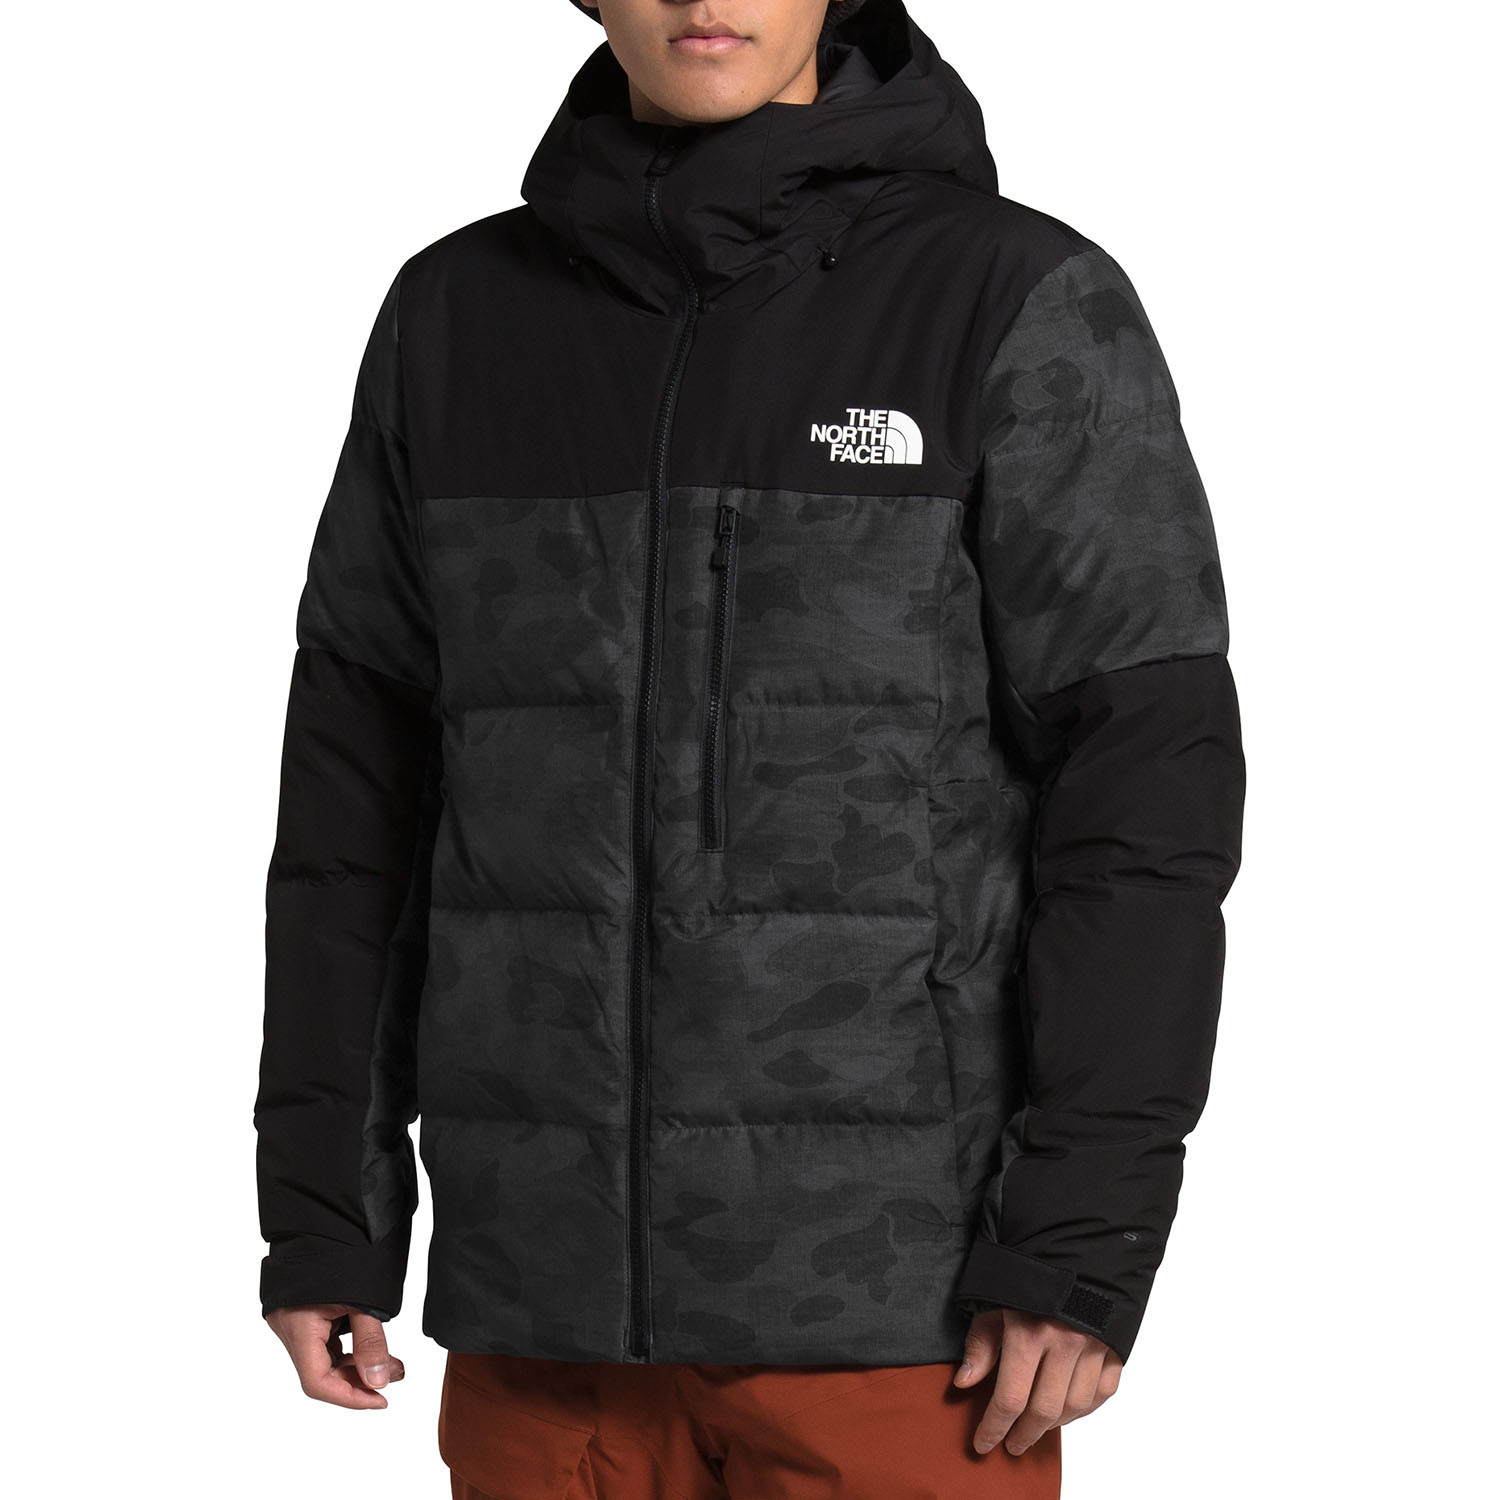 The North Face Corefire Down Jacket | The Ski Monster